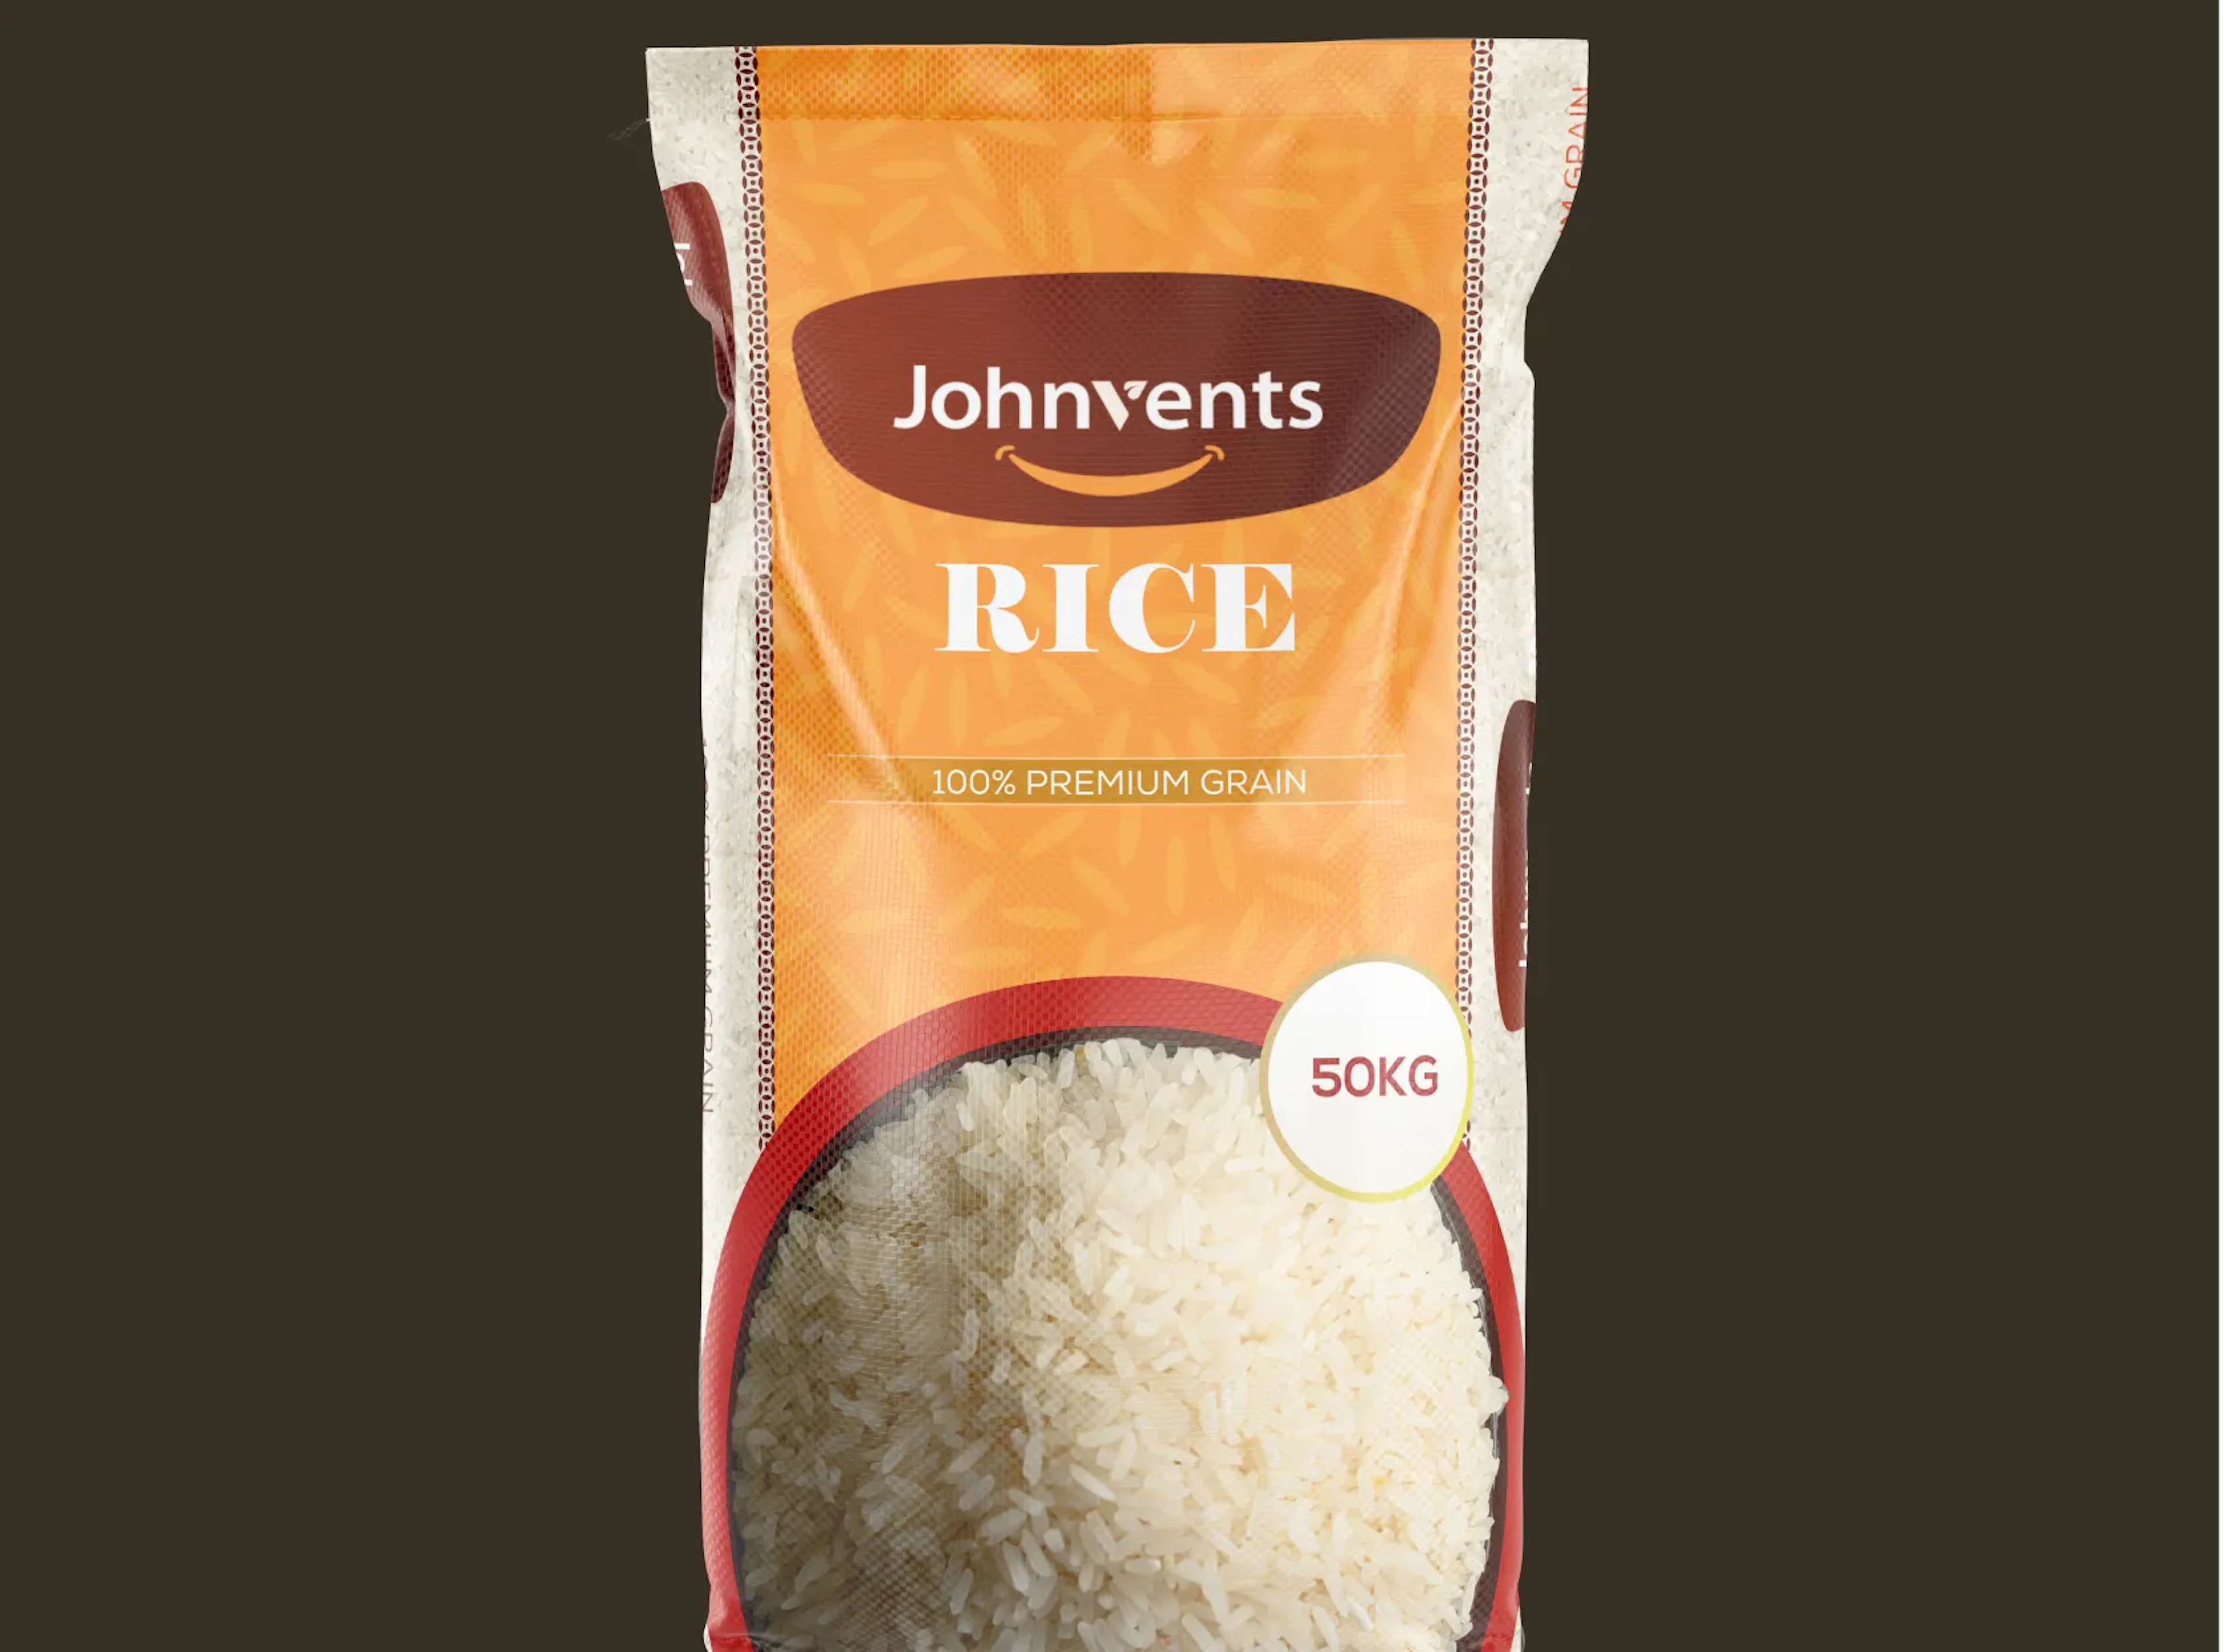 Johnvents Rice